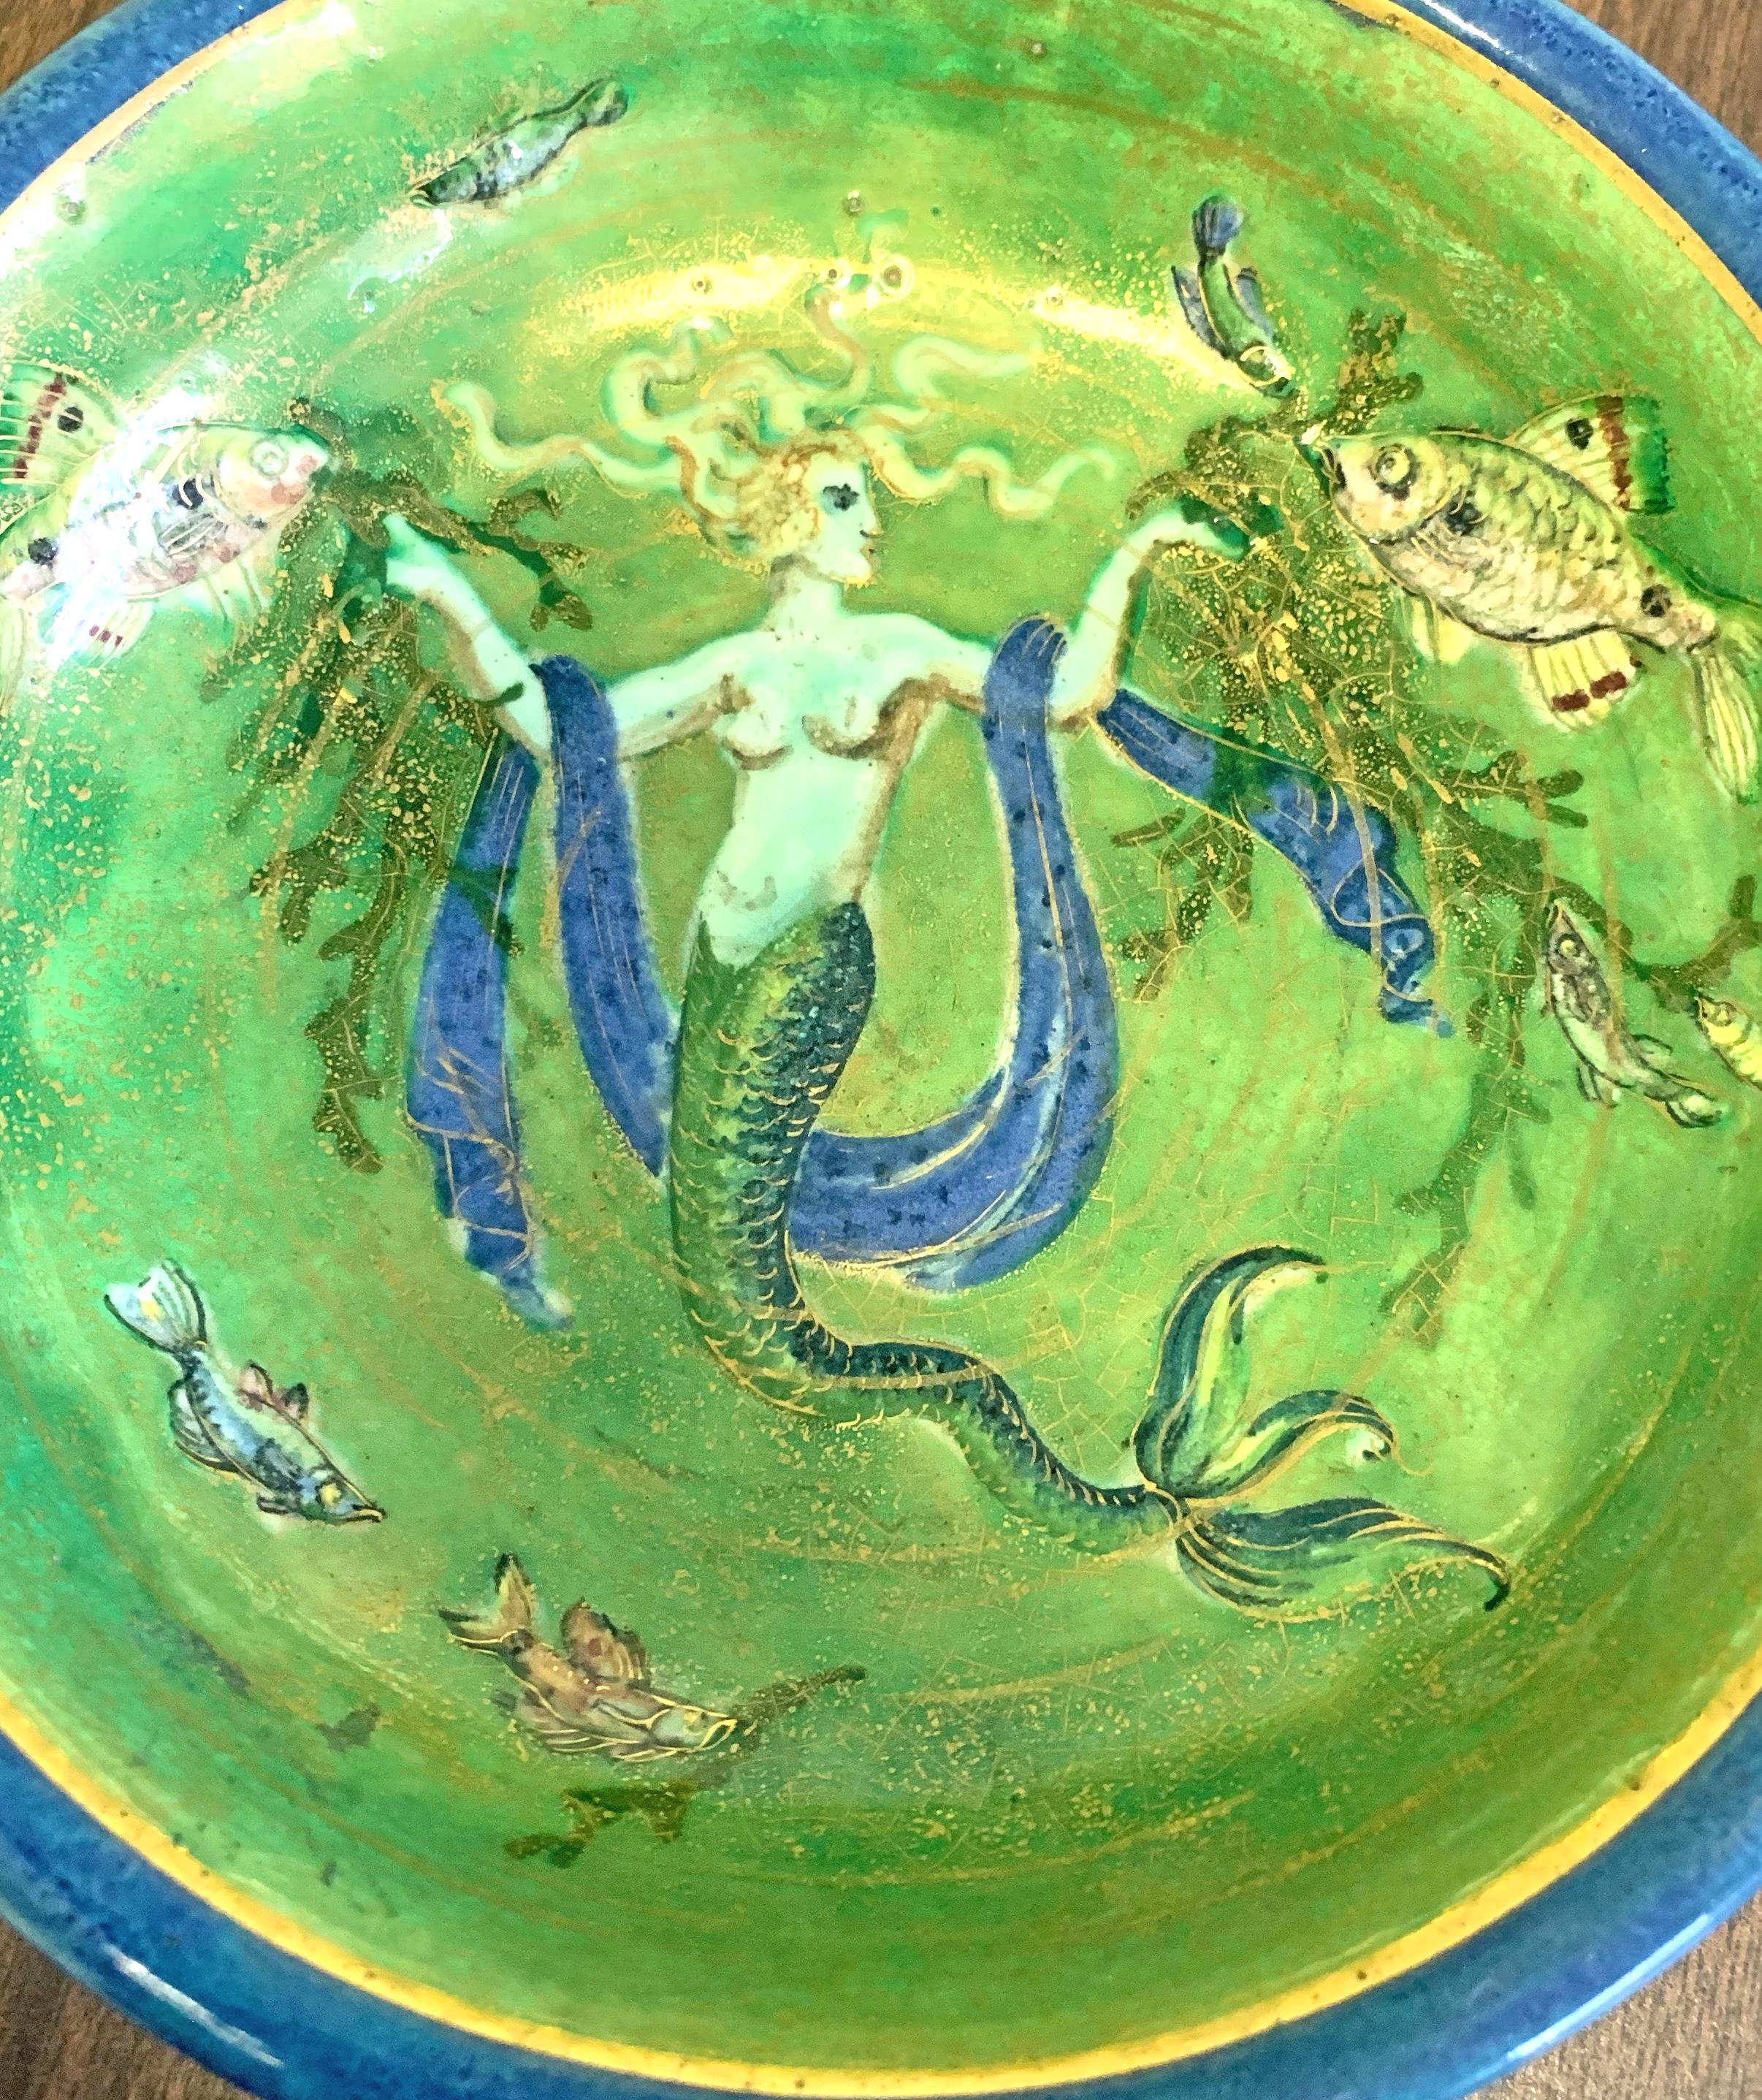 Glazed in gorgeous jewel tones, emerald green and sapphire blue, this unique and extraordinary Art Deco bowl was created by an artistic husband-and-wife team in France: Auguste and Odette Chatrousse Heiligenstein. Auguste was sometimes known for the